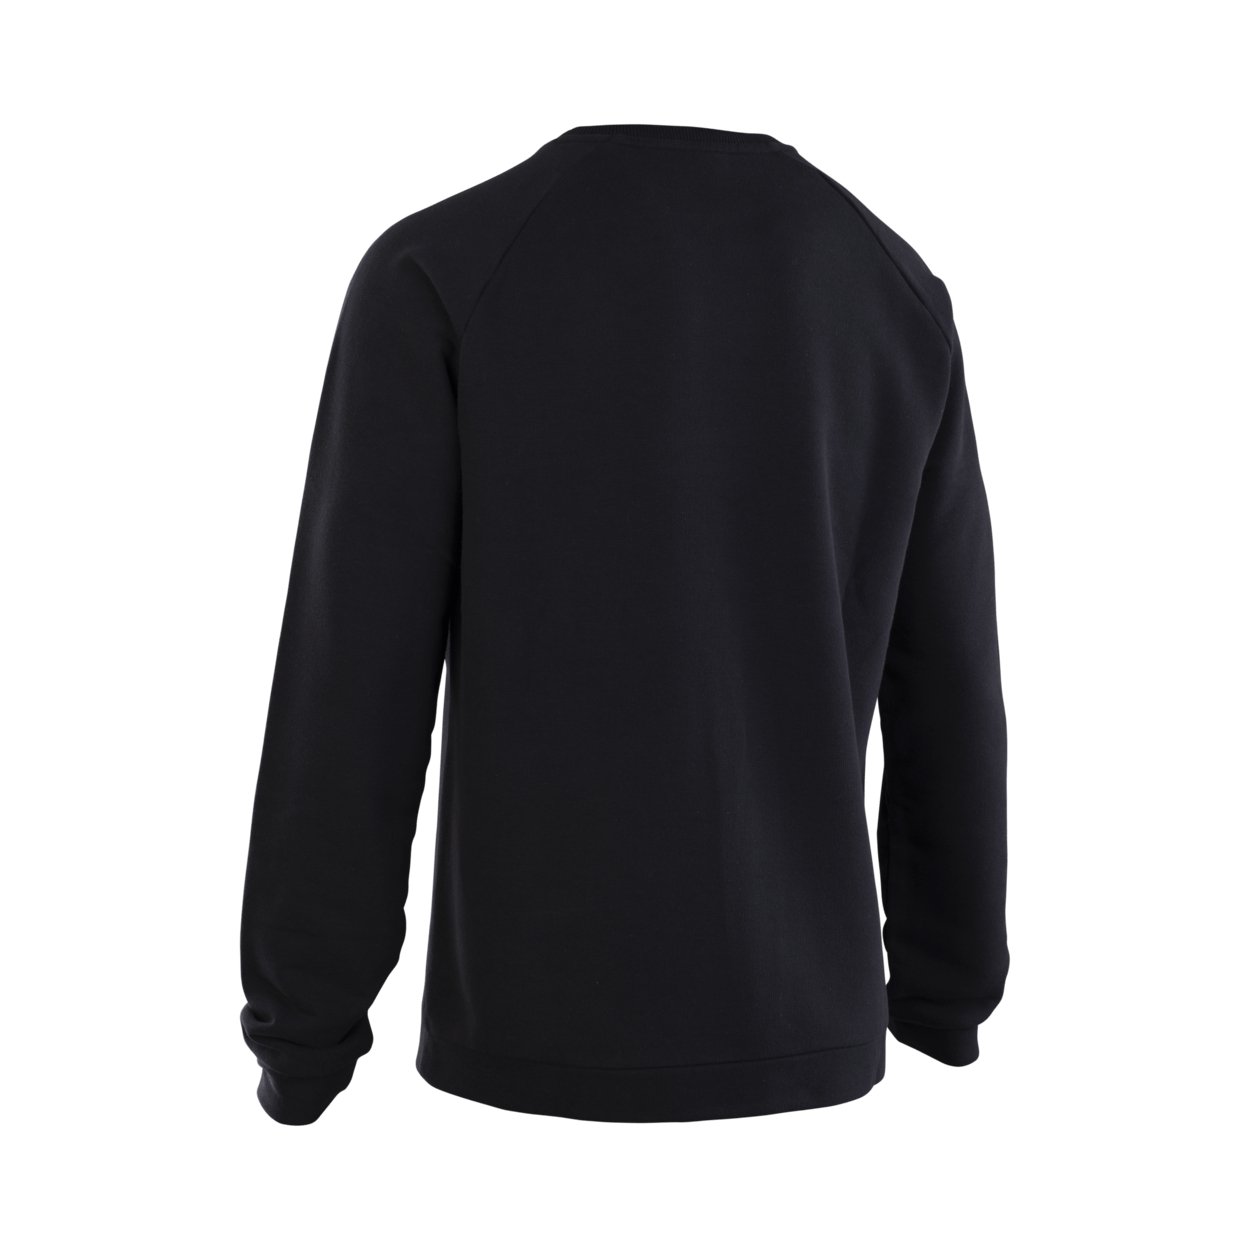 ION Sweater Surfing Elements Men 2024 - Worthing Watersports - 9010583162188 - Apparel - ION Bike